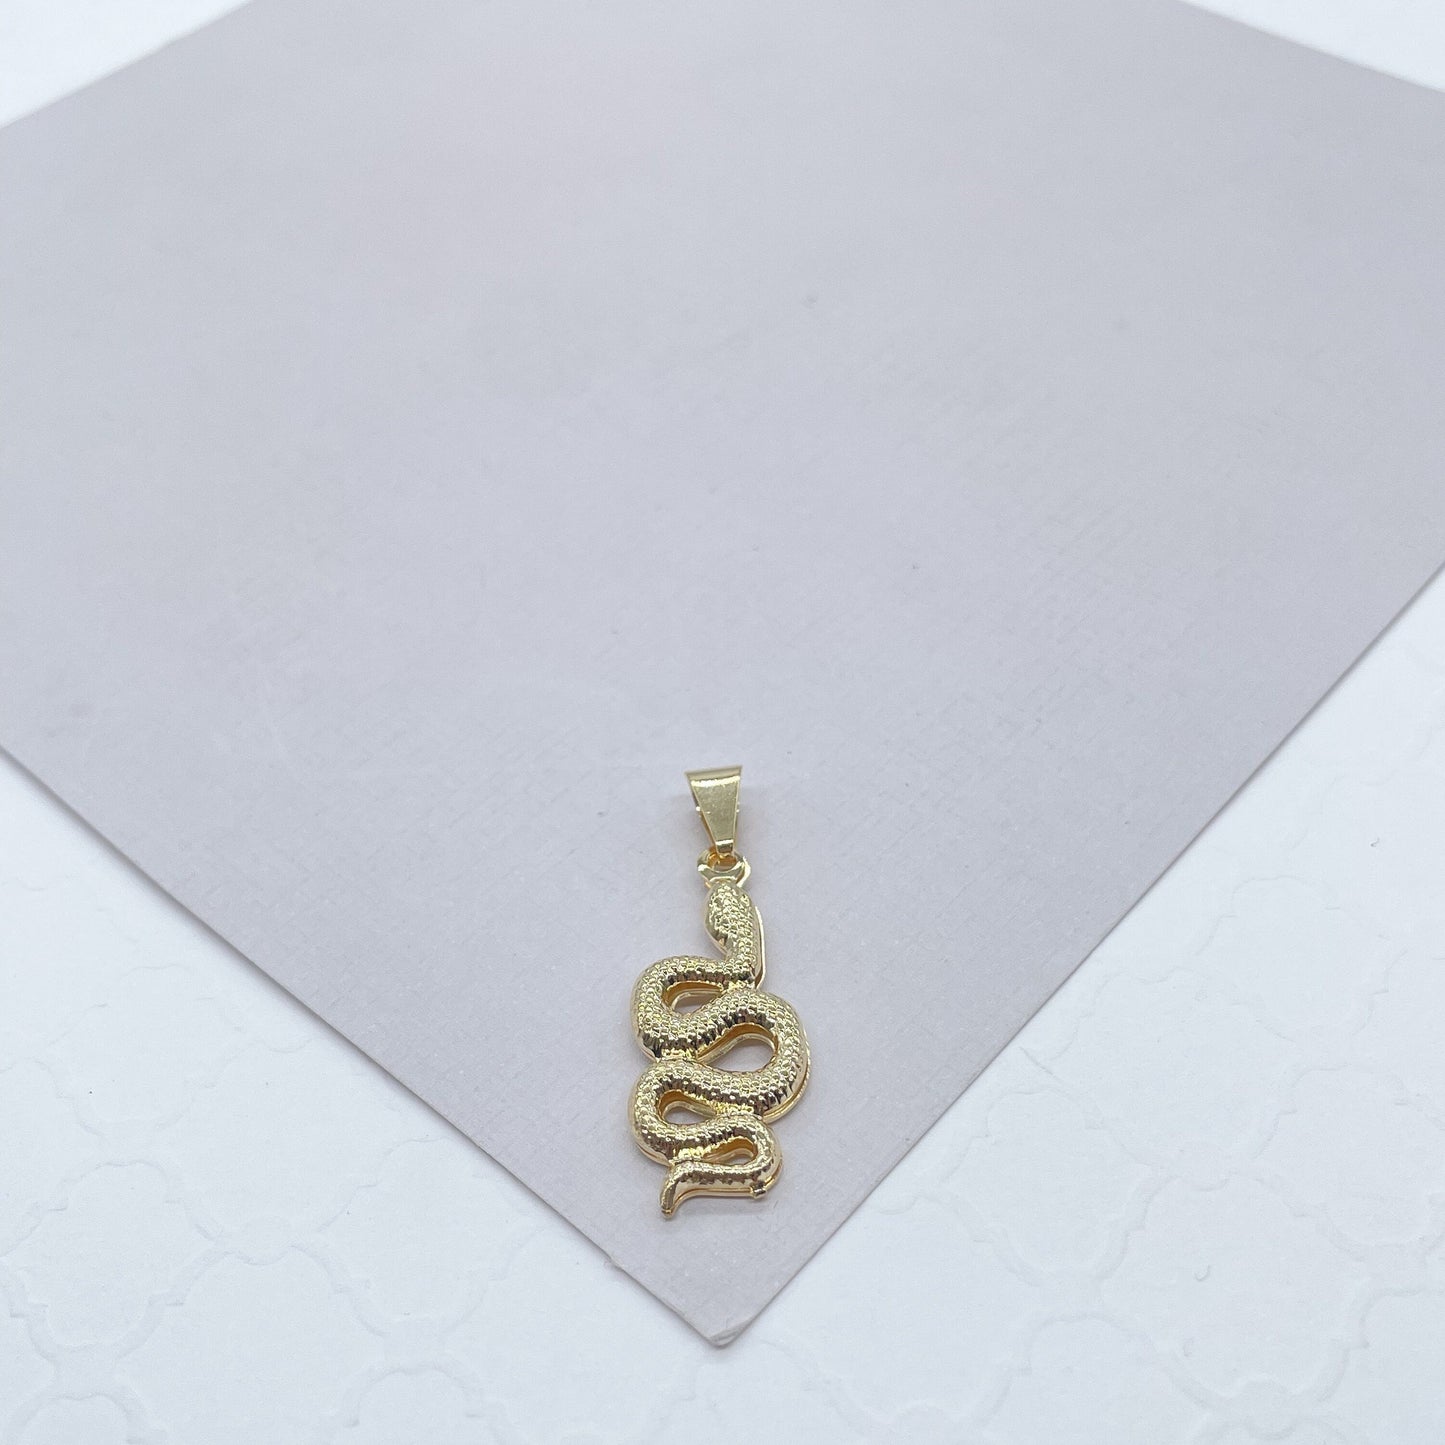 18k Gold Filled Small Snake Charm Pendant for Chains